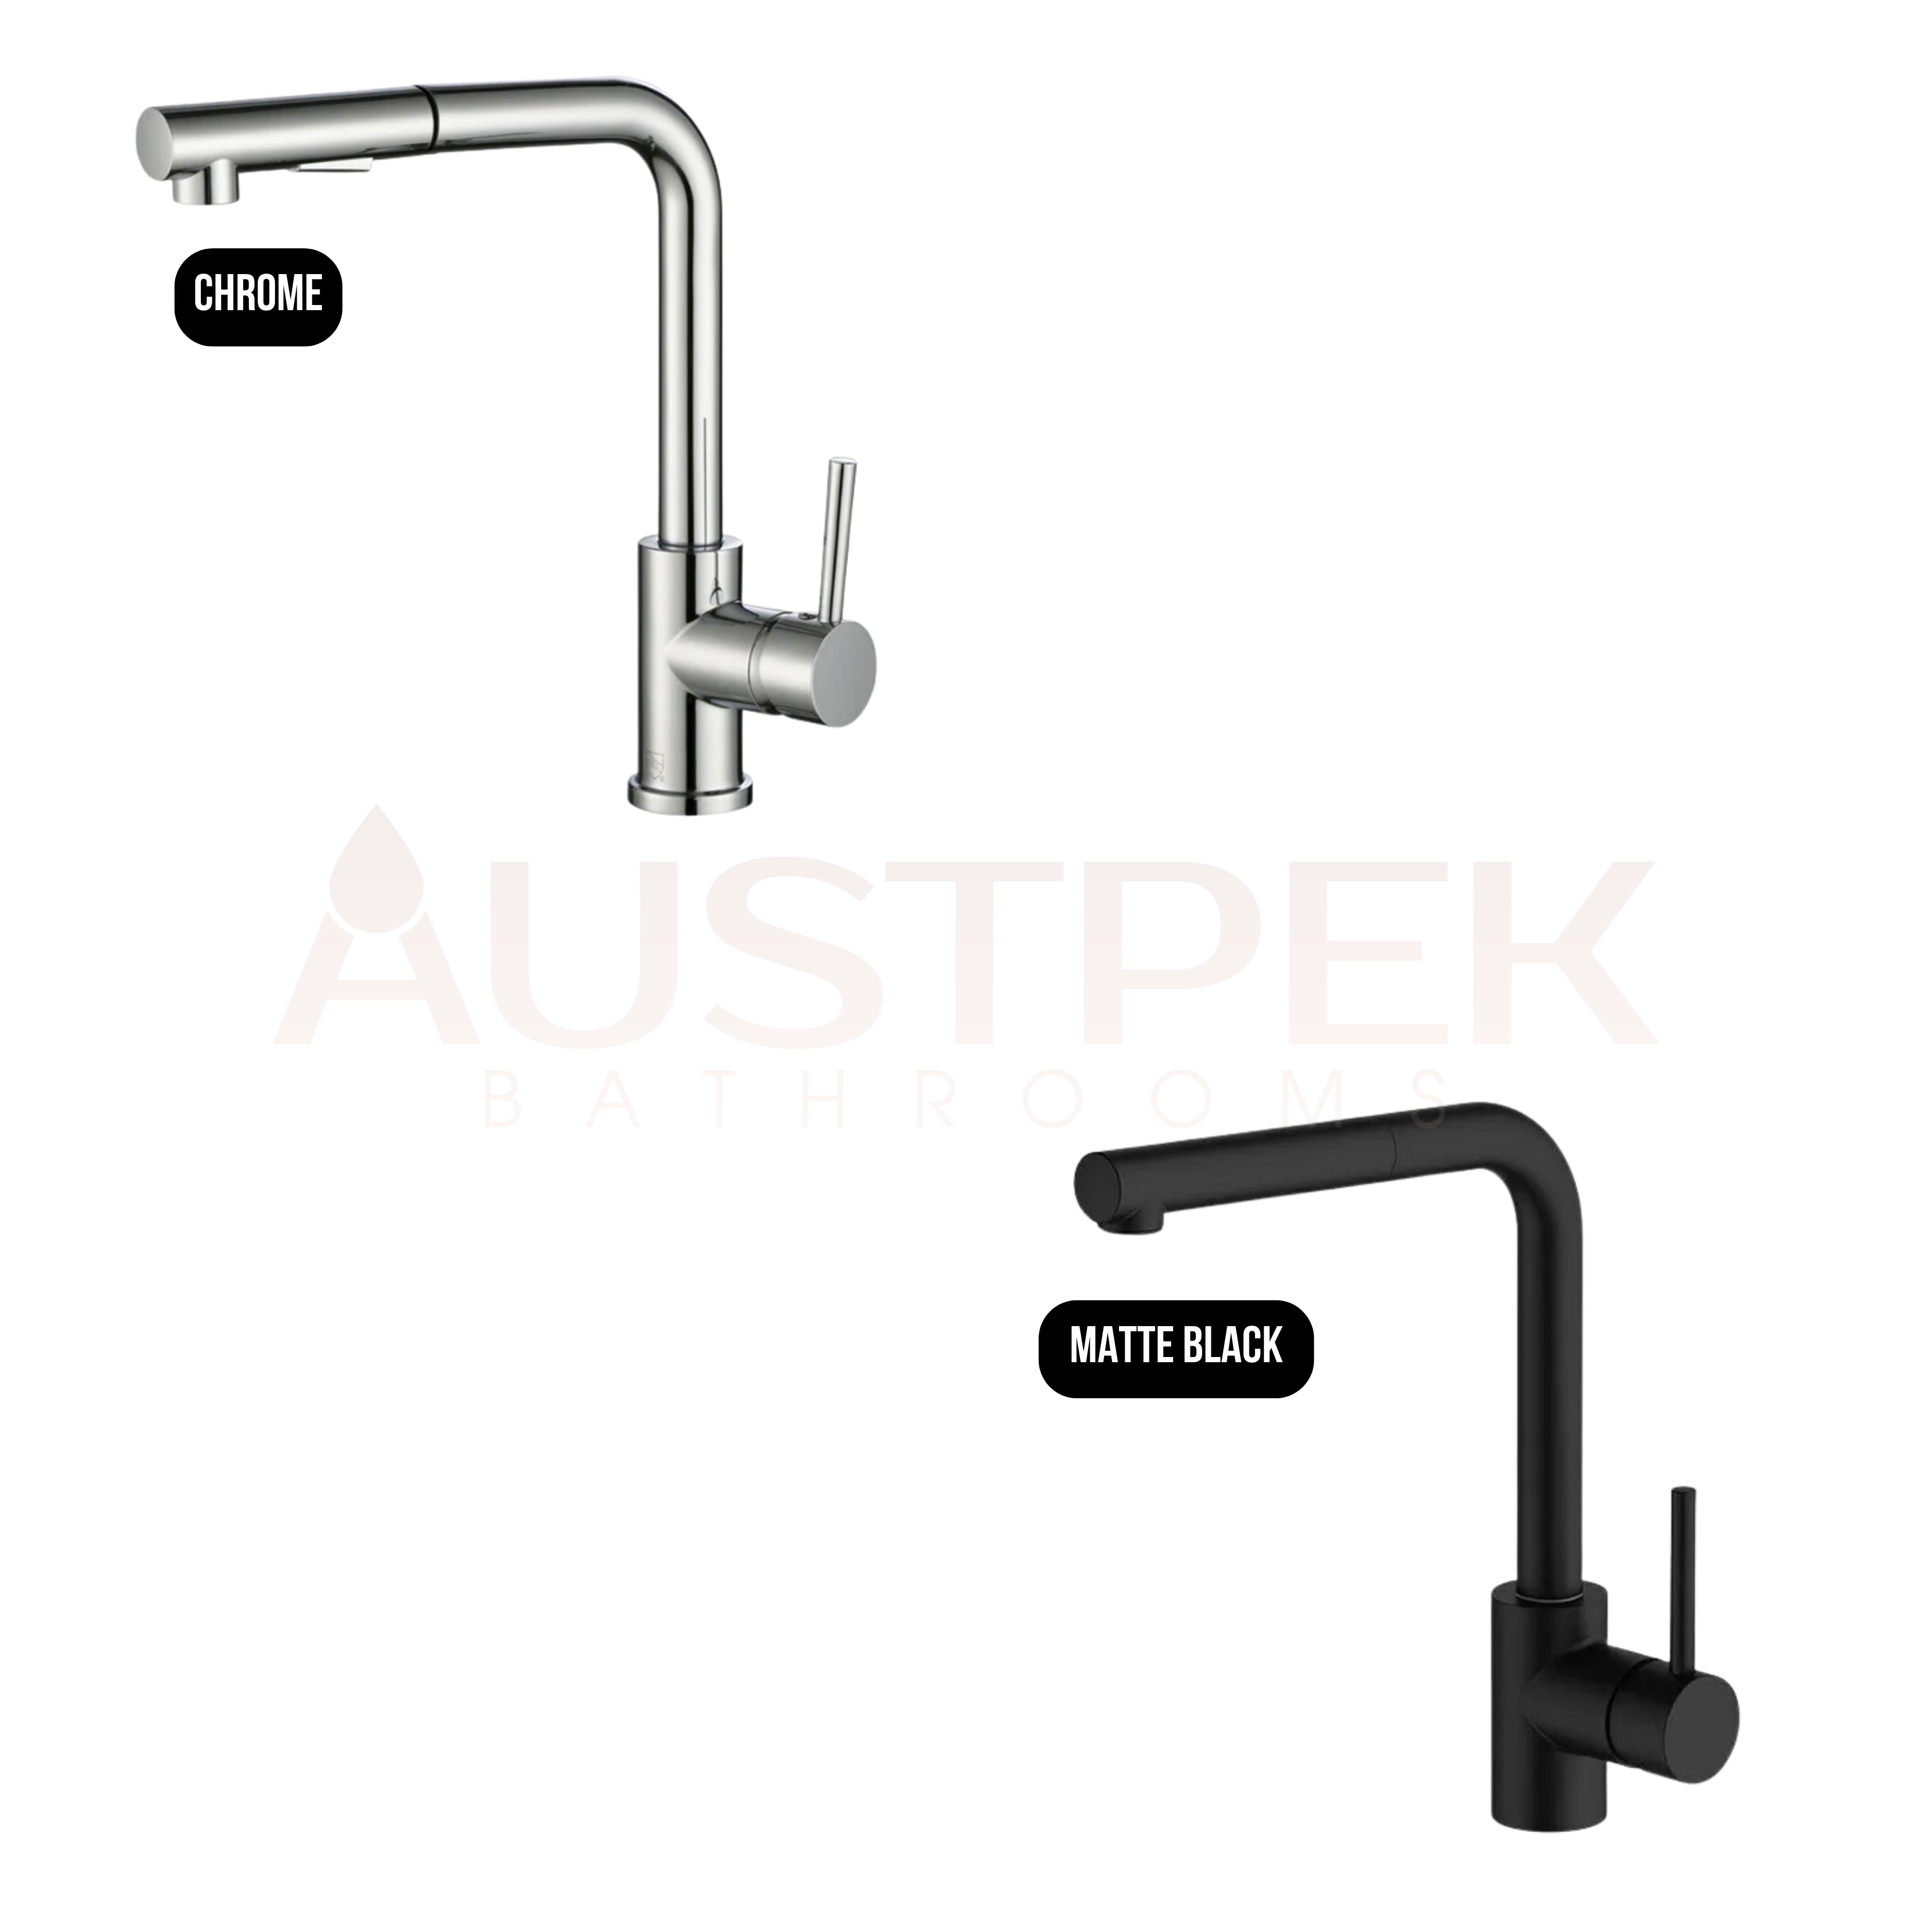 INSPIRE PULL OUT KITCHEN MIXER BLACK